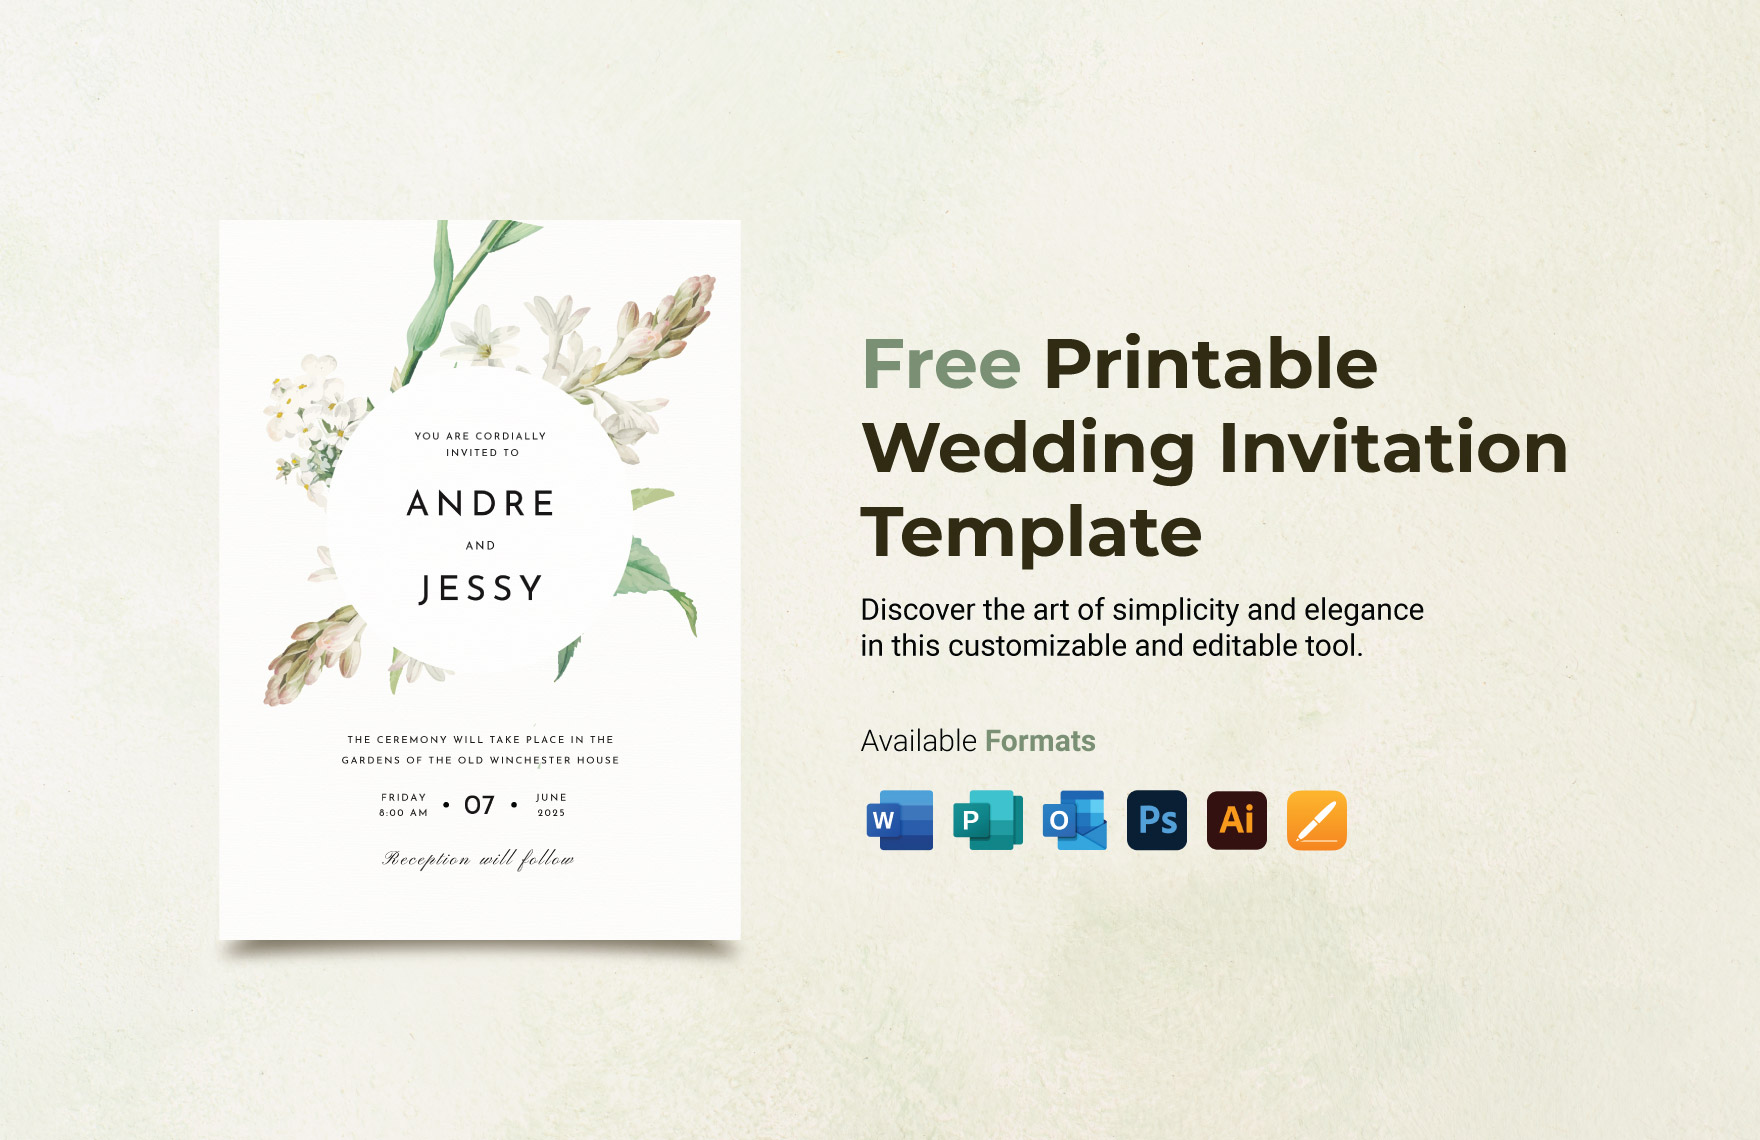 Free Printable Wedding Invitation Template in Word, Illustrator, PSD, Apple Pages, Publisher, Outlook